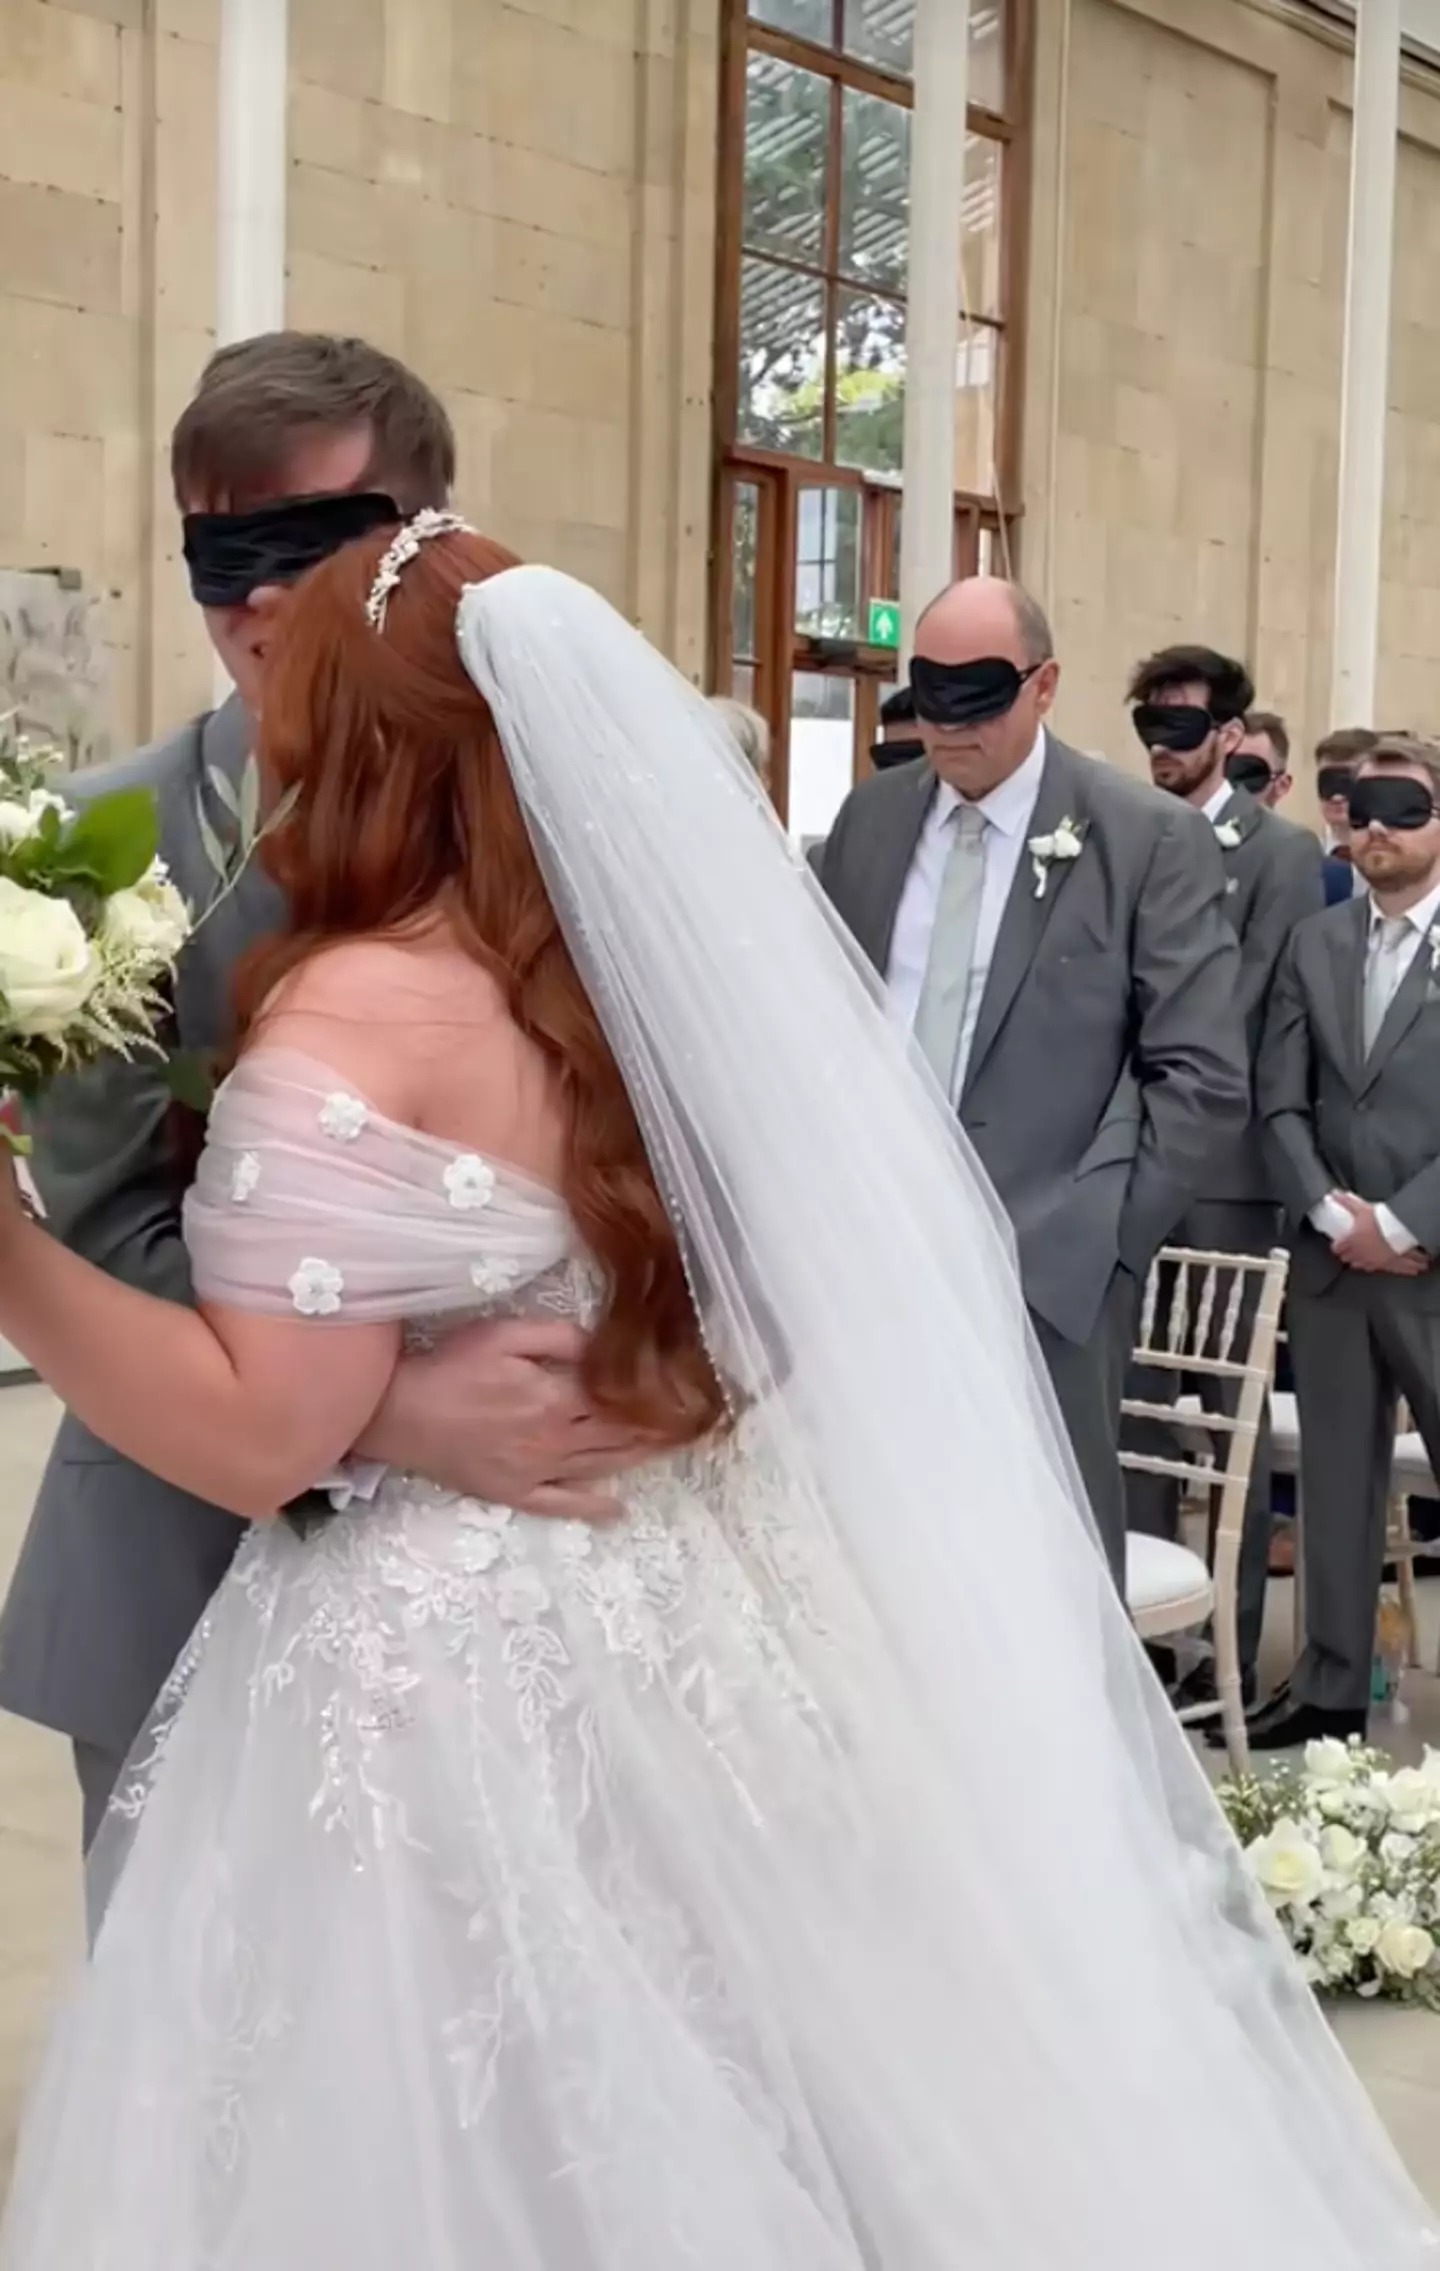 Lucy Edwards asked her groom and guests to wear blindfolds for part of the ceremony.